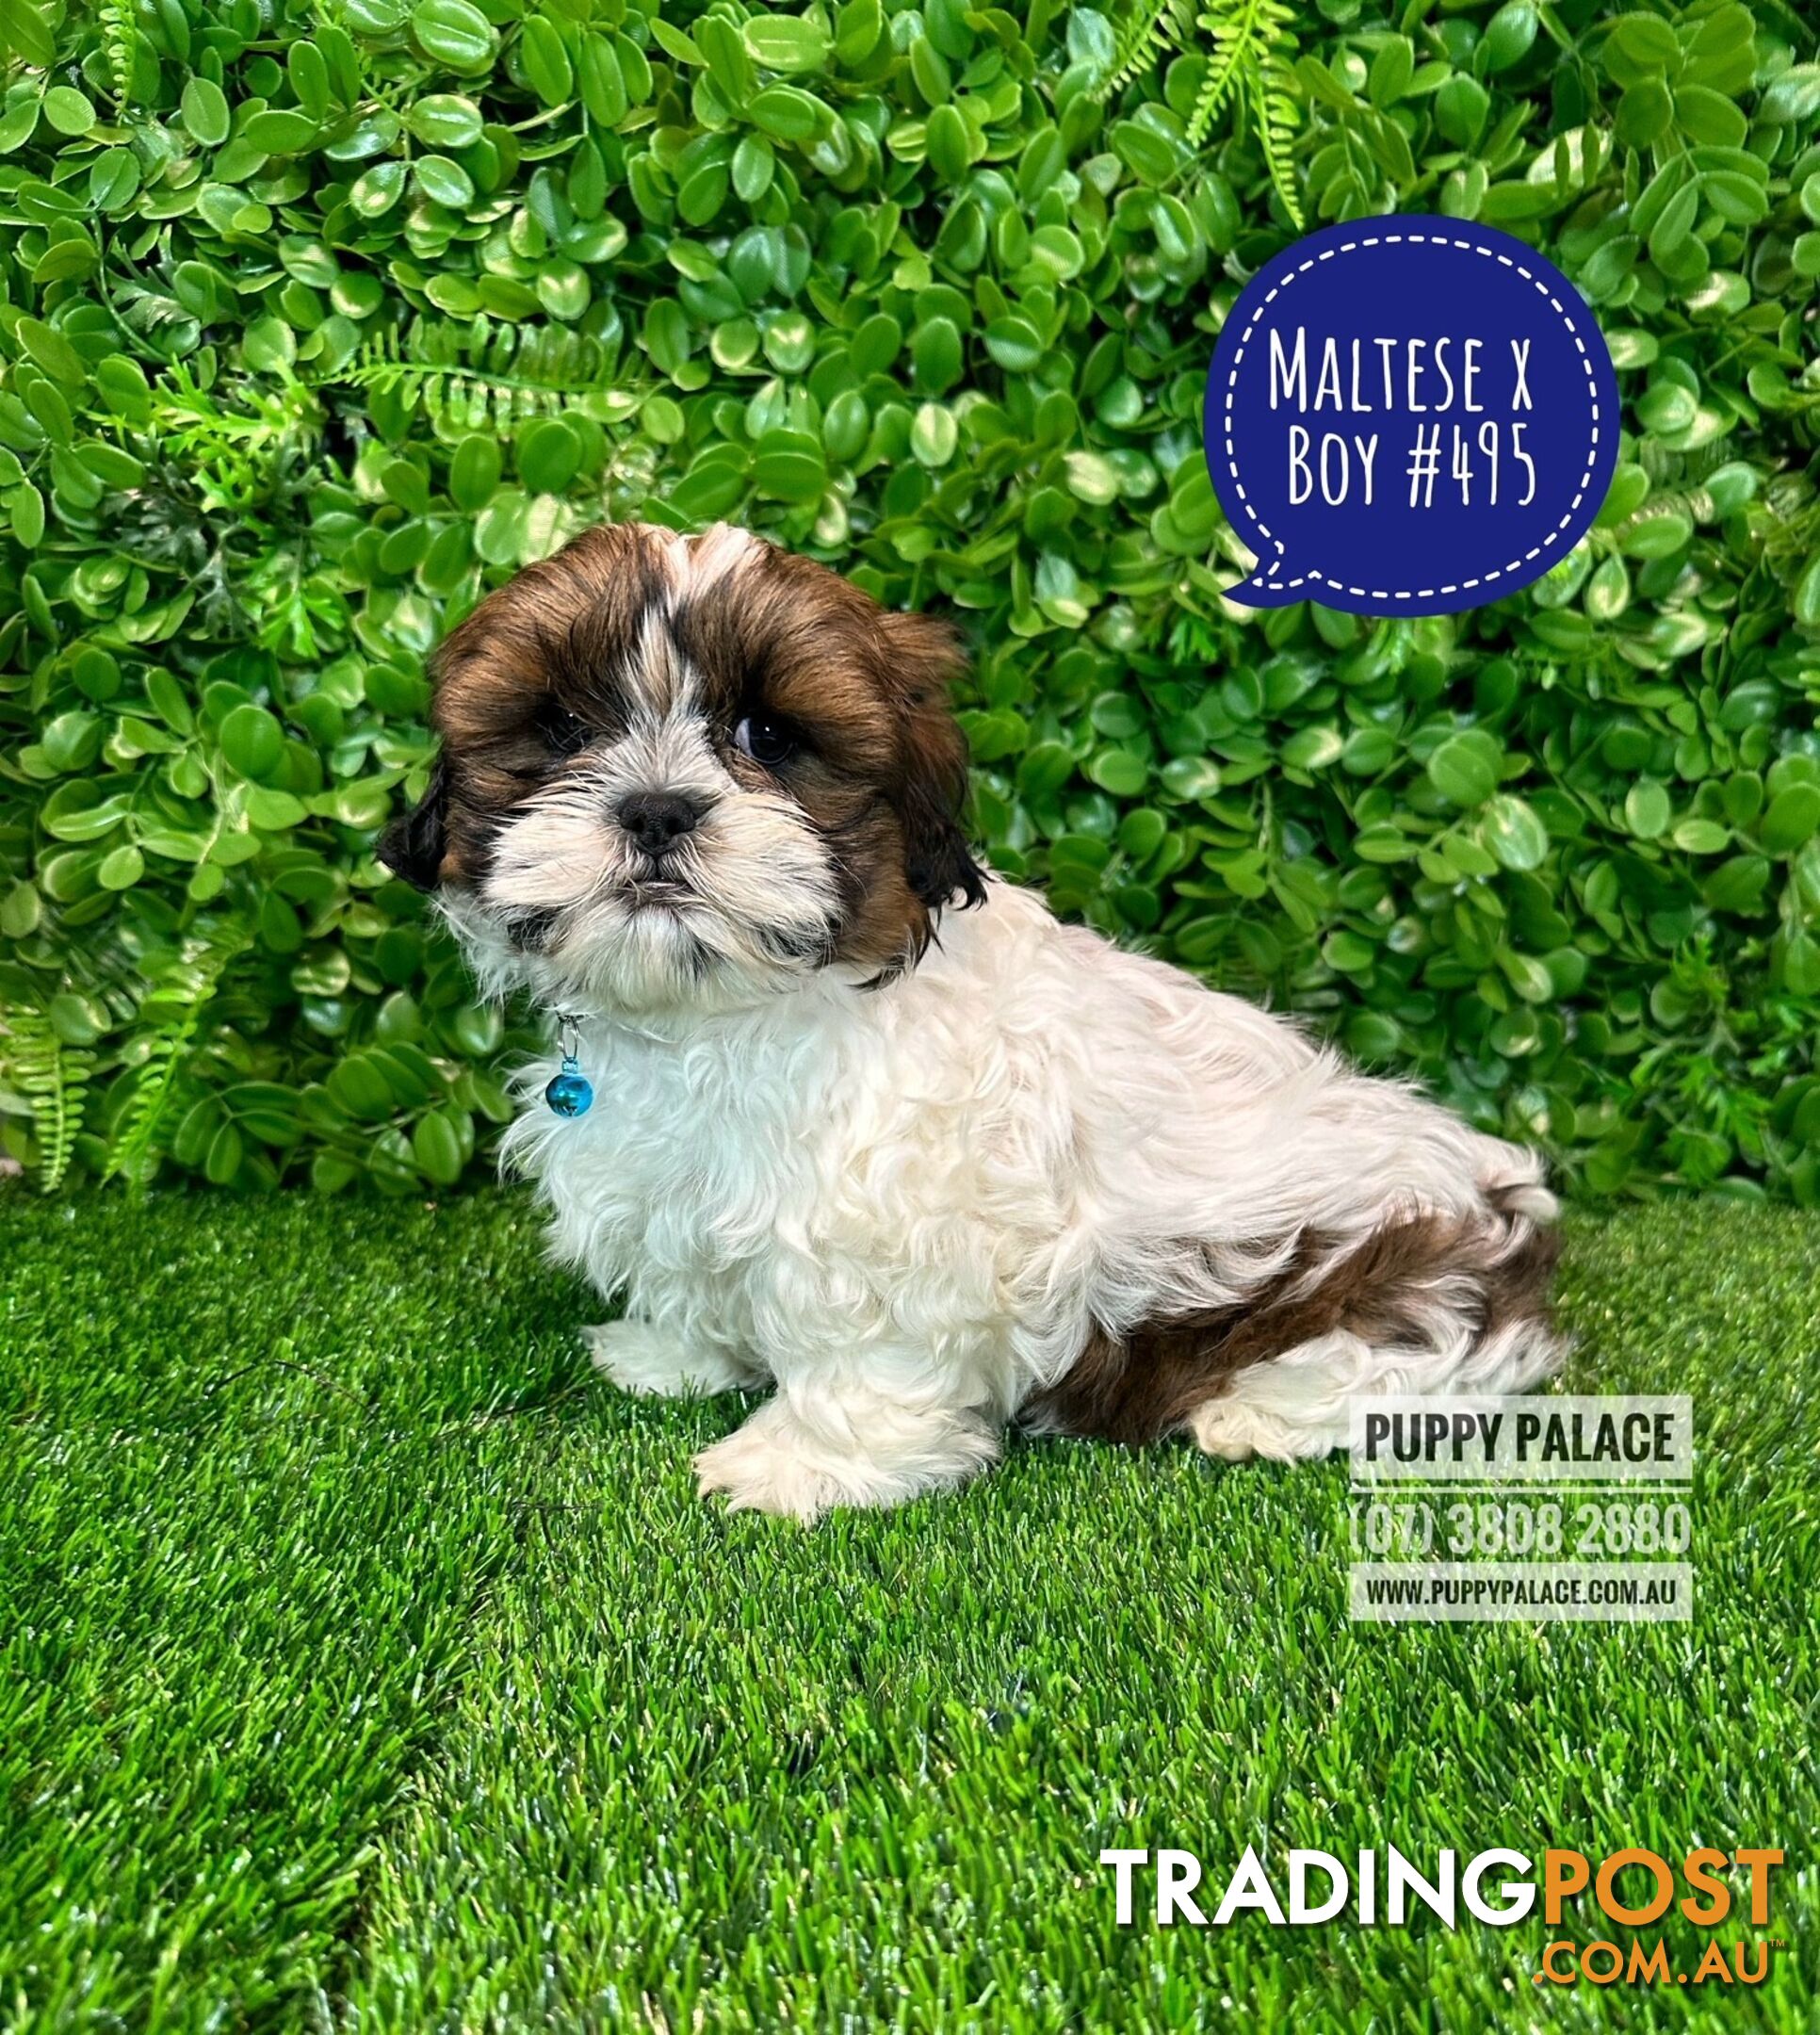 Maltese X Shih Tzu - Boys. In store now at Puppy Palace Pet Shop, Brisbane.